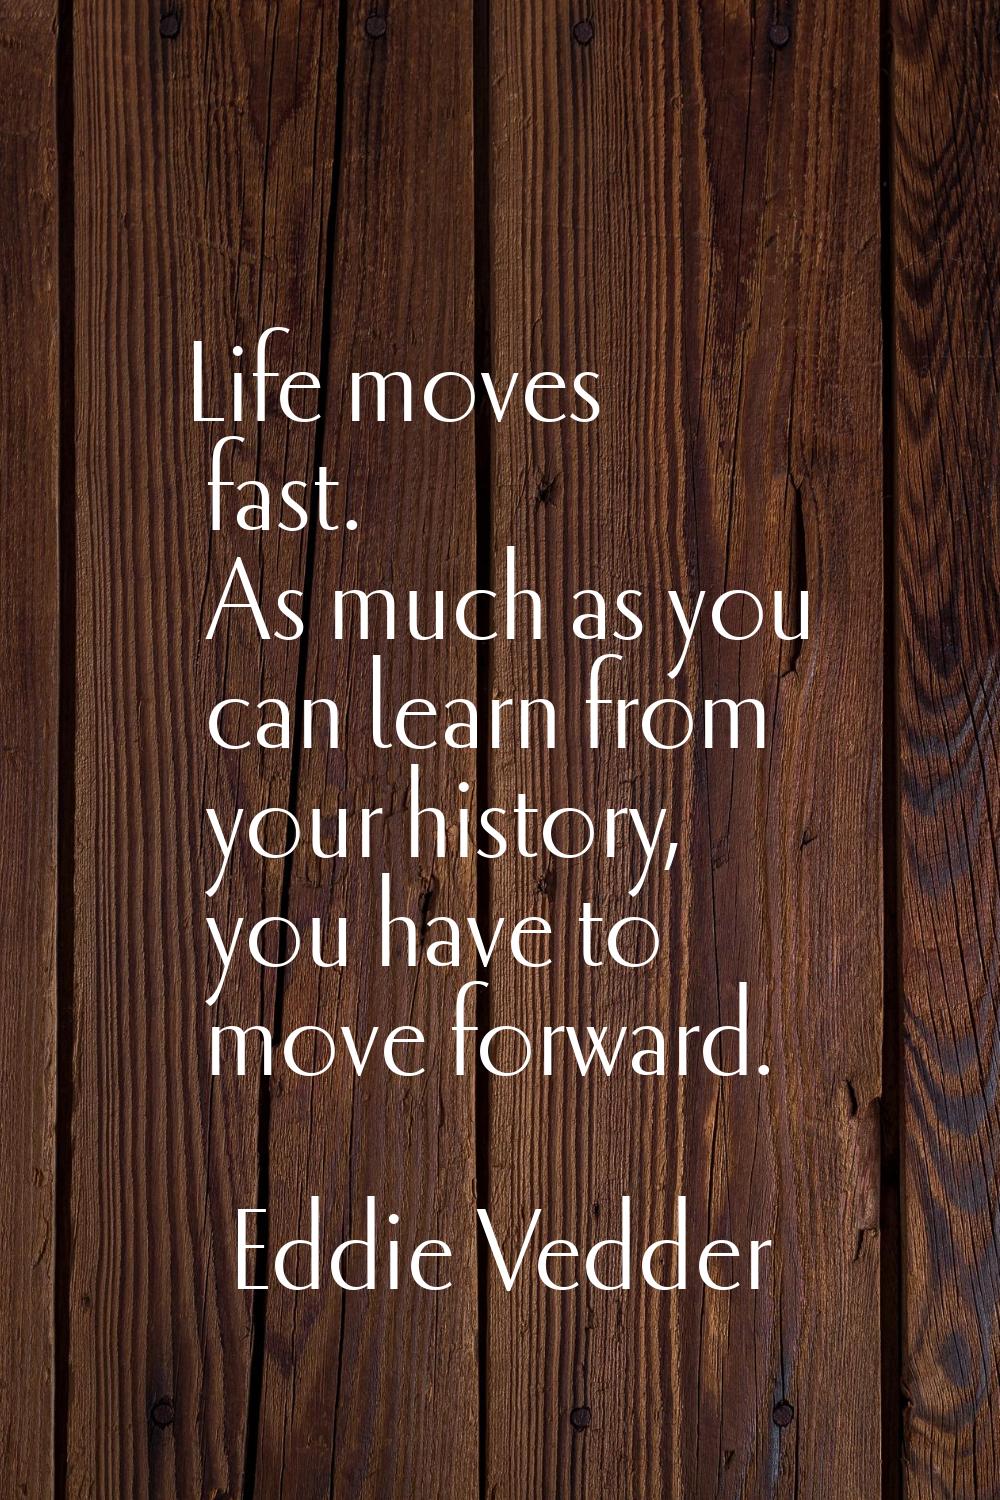 Life moves fast. As much as you can learn from your history, you have to move forward.